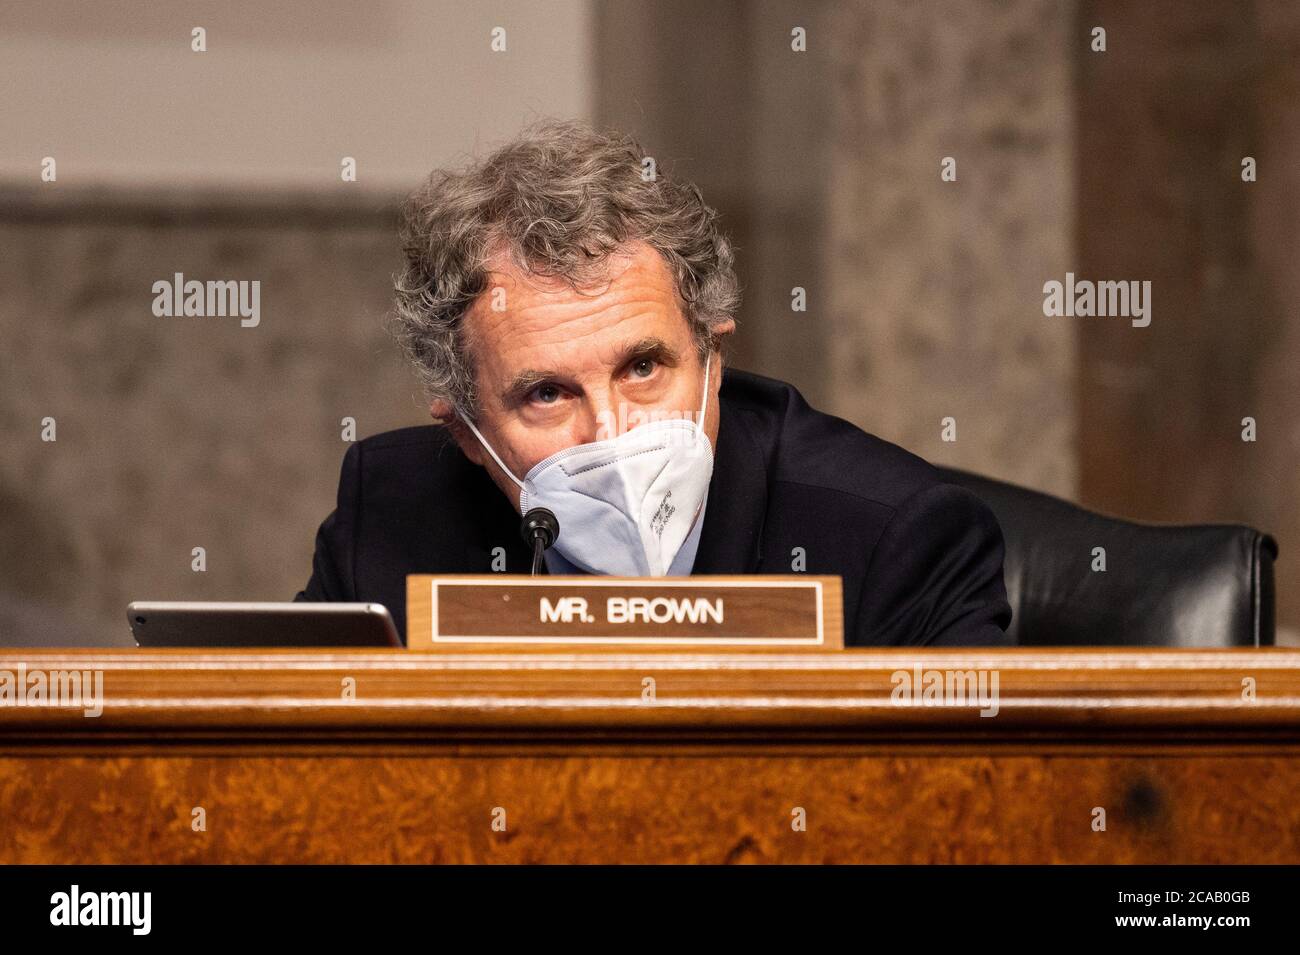 Washington, U.S. 05th Aug, 2020. August 5, 2020 - Washington, DC, United States: U.S. Senator Sherrod Brown (D-OH) speaking at a Senate Banking, Housing, and Urban Affairs committee business meeting to consider the nominations of Hester Maria Peirce, of Ohio, and Caroline A. Crenshaw, of the District of Columbia, both to be a Member of the Securities and Exchange Commission, and Kyle Hauptman, of Maine, to be a Member of the National Credit Union Administration Board. (Photo by Michael Brochstein/Sipa USA) Credit: Sipa USA/Alamy Live News Stock Photo